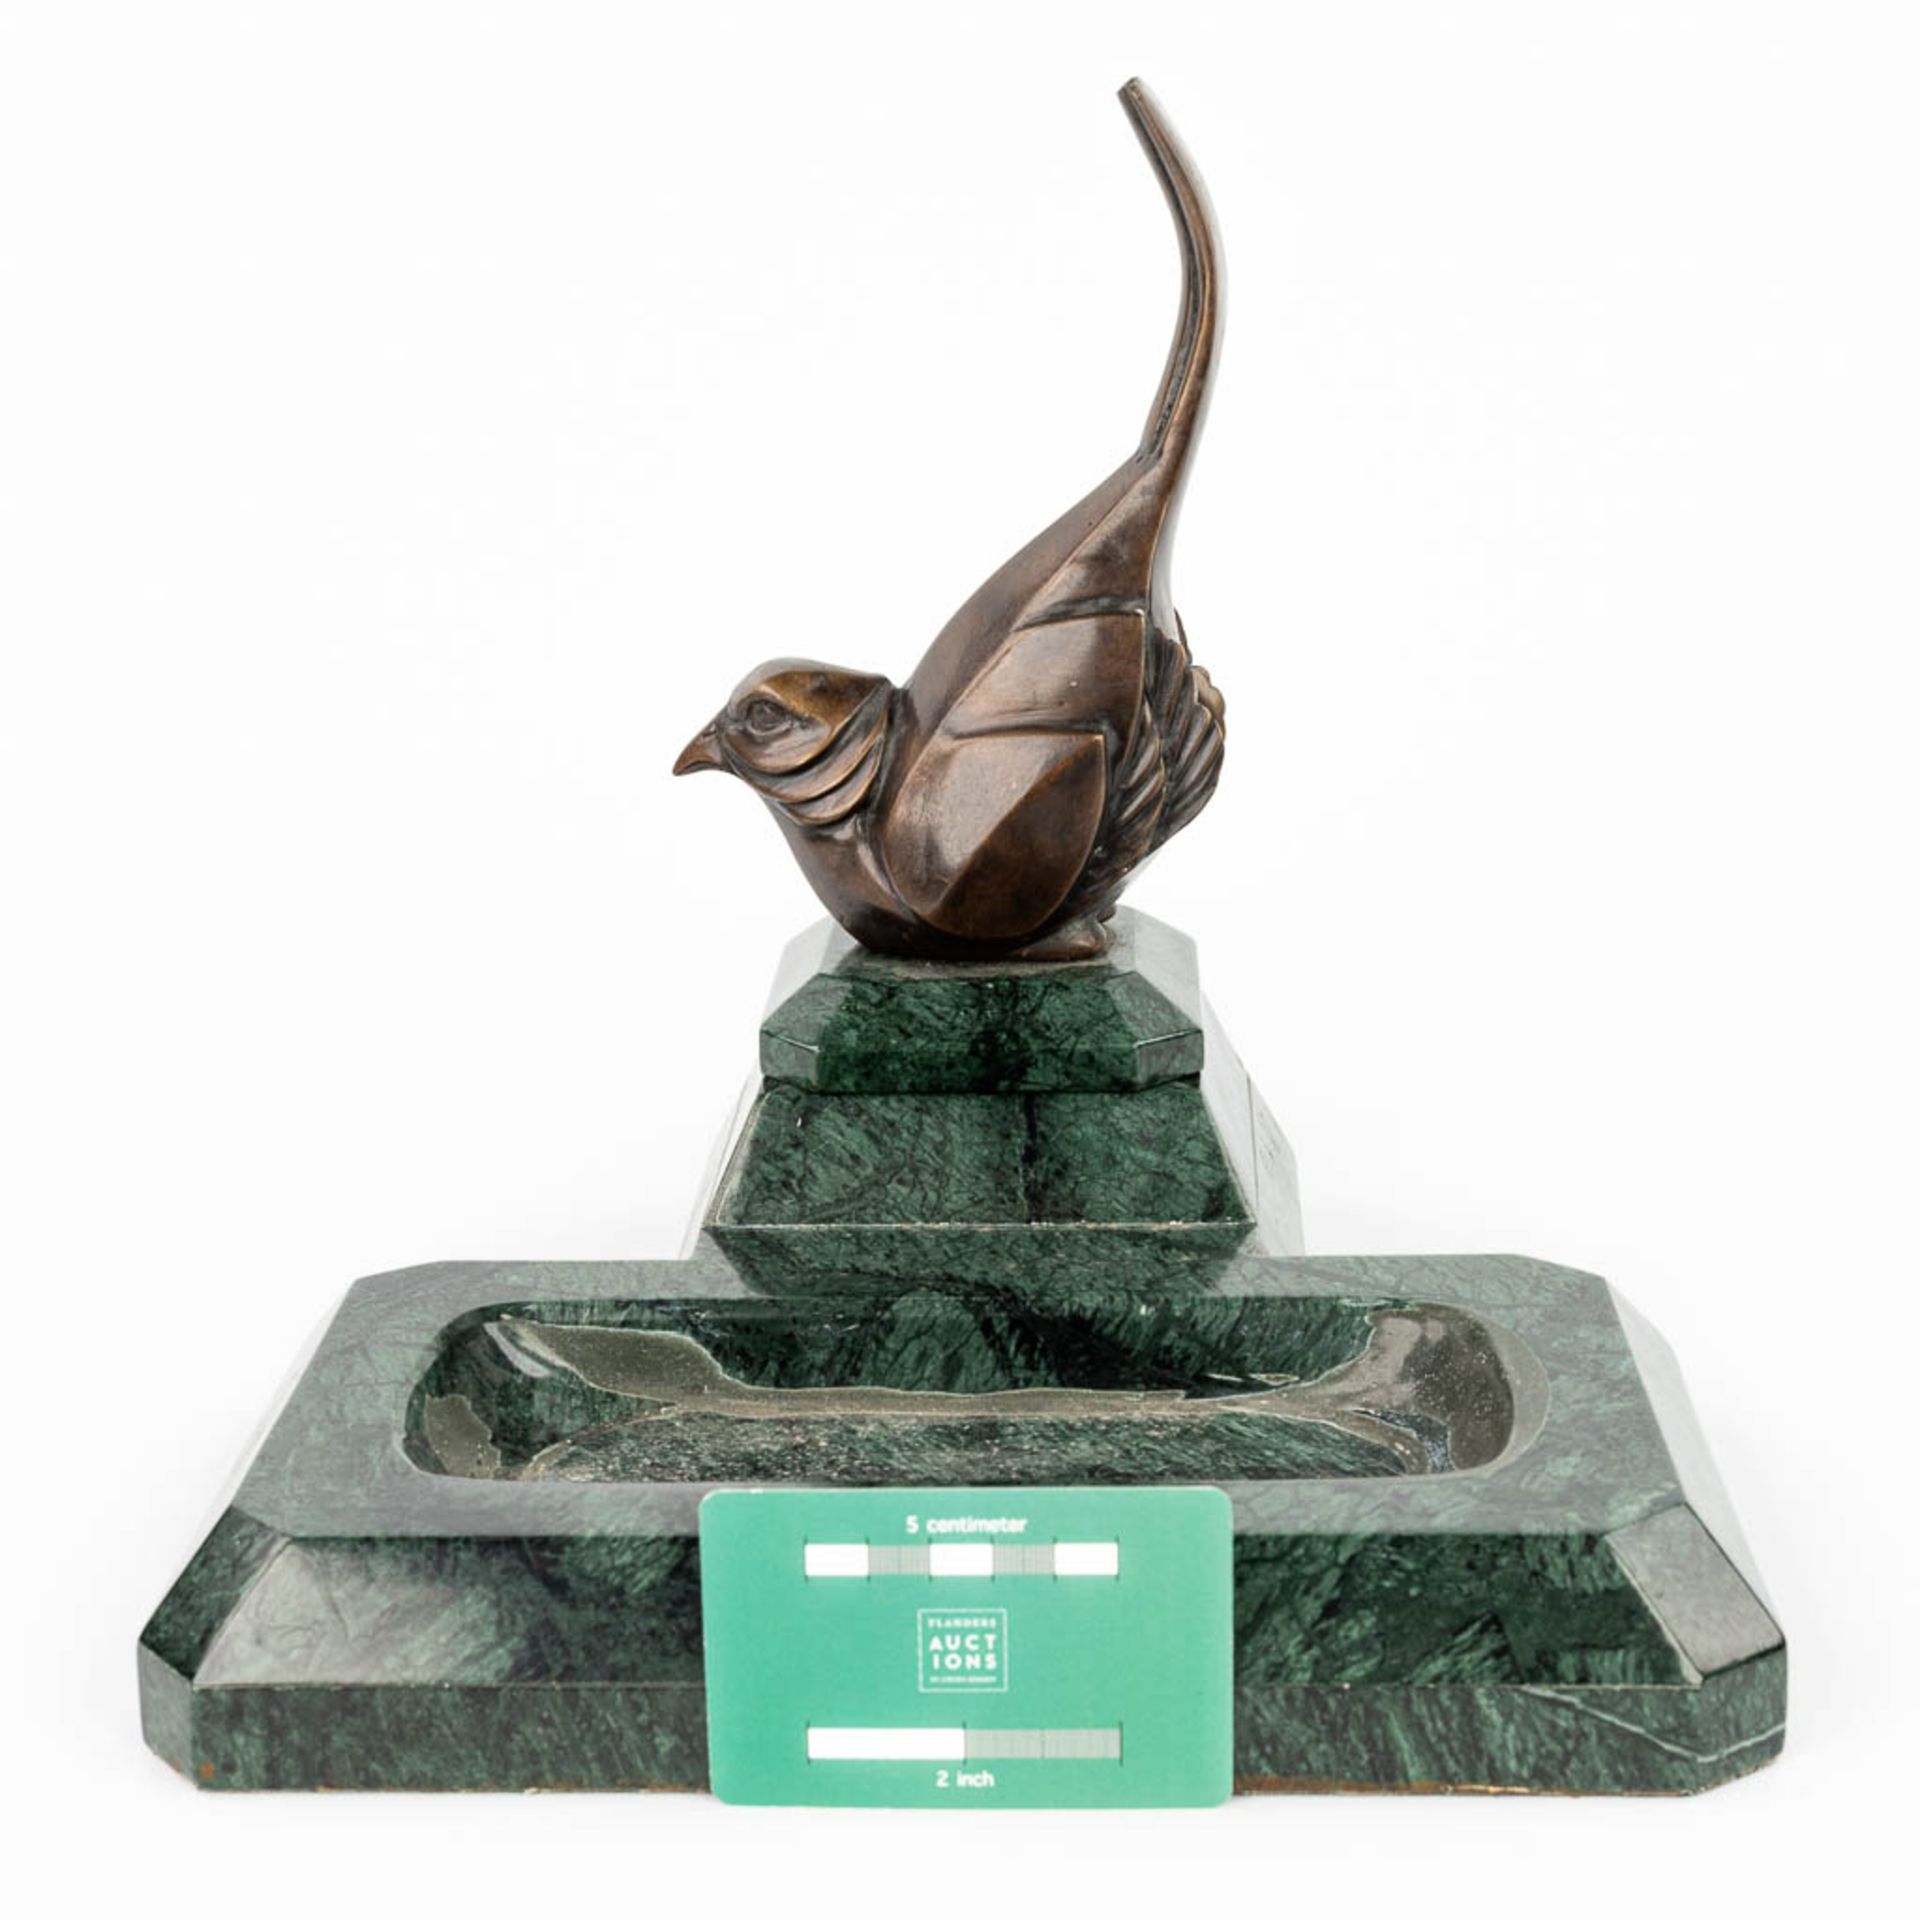 A 'Vide Poche' made of marble with a bird made of bronze in art deco style. - Image 3 of 10